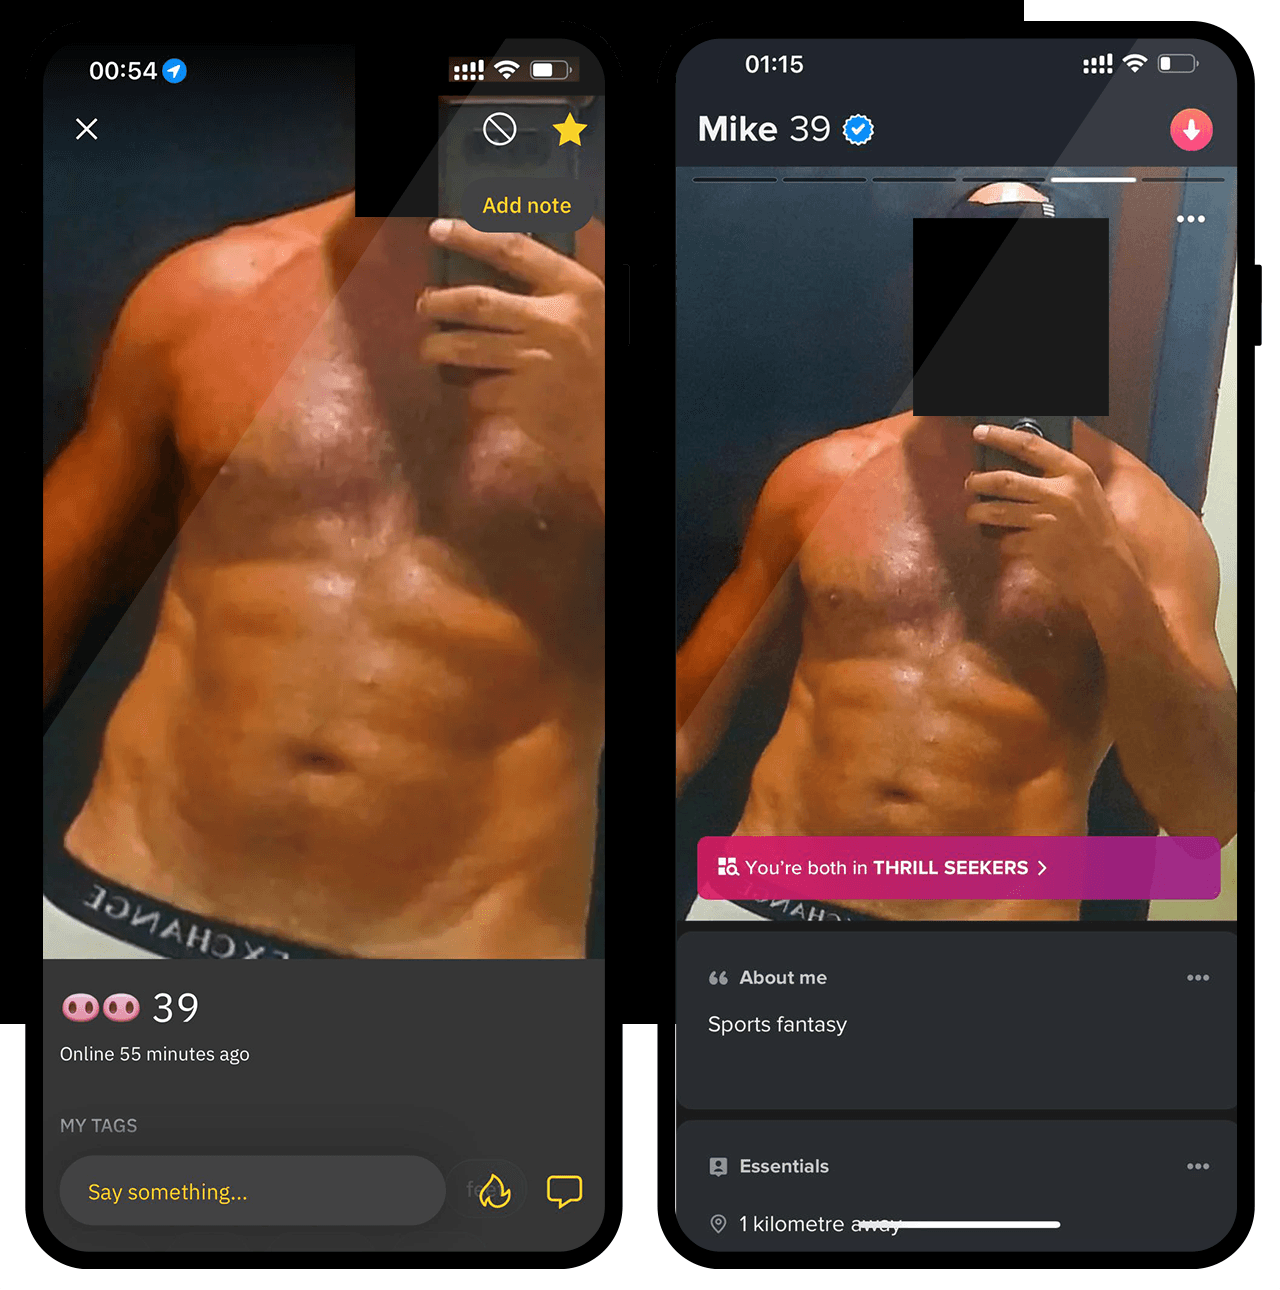 Grindr and Tinder profiles for 'Gio'